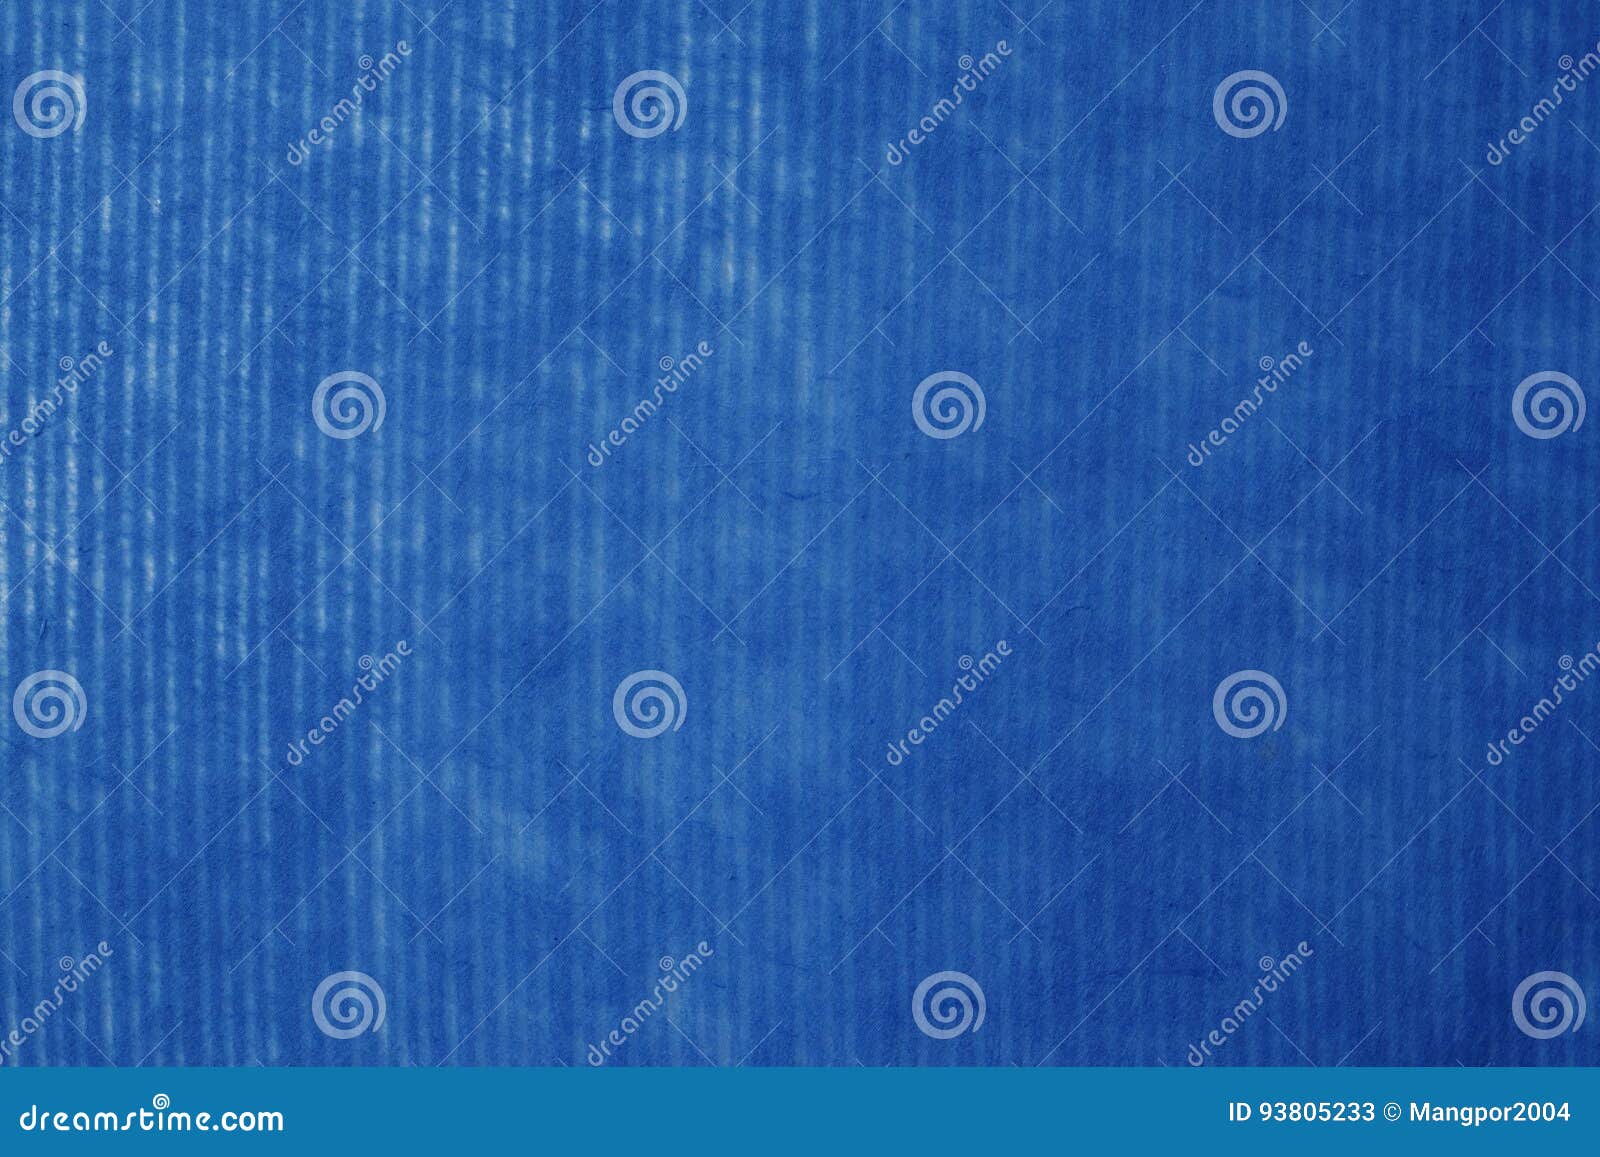 Rough Navy Blue Paper Image & Photo (Free Trial)